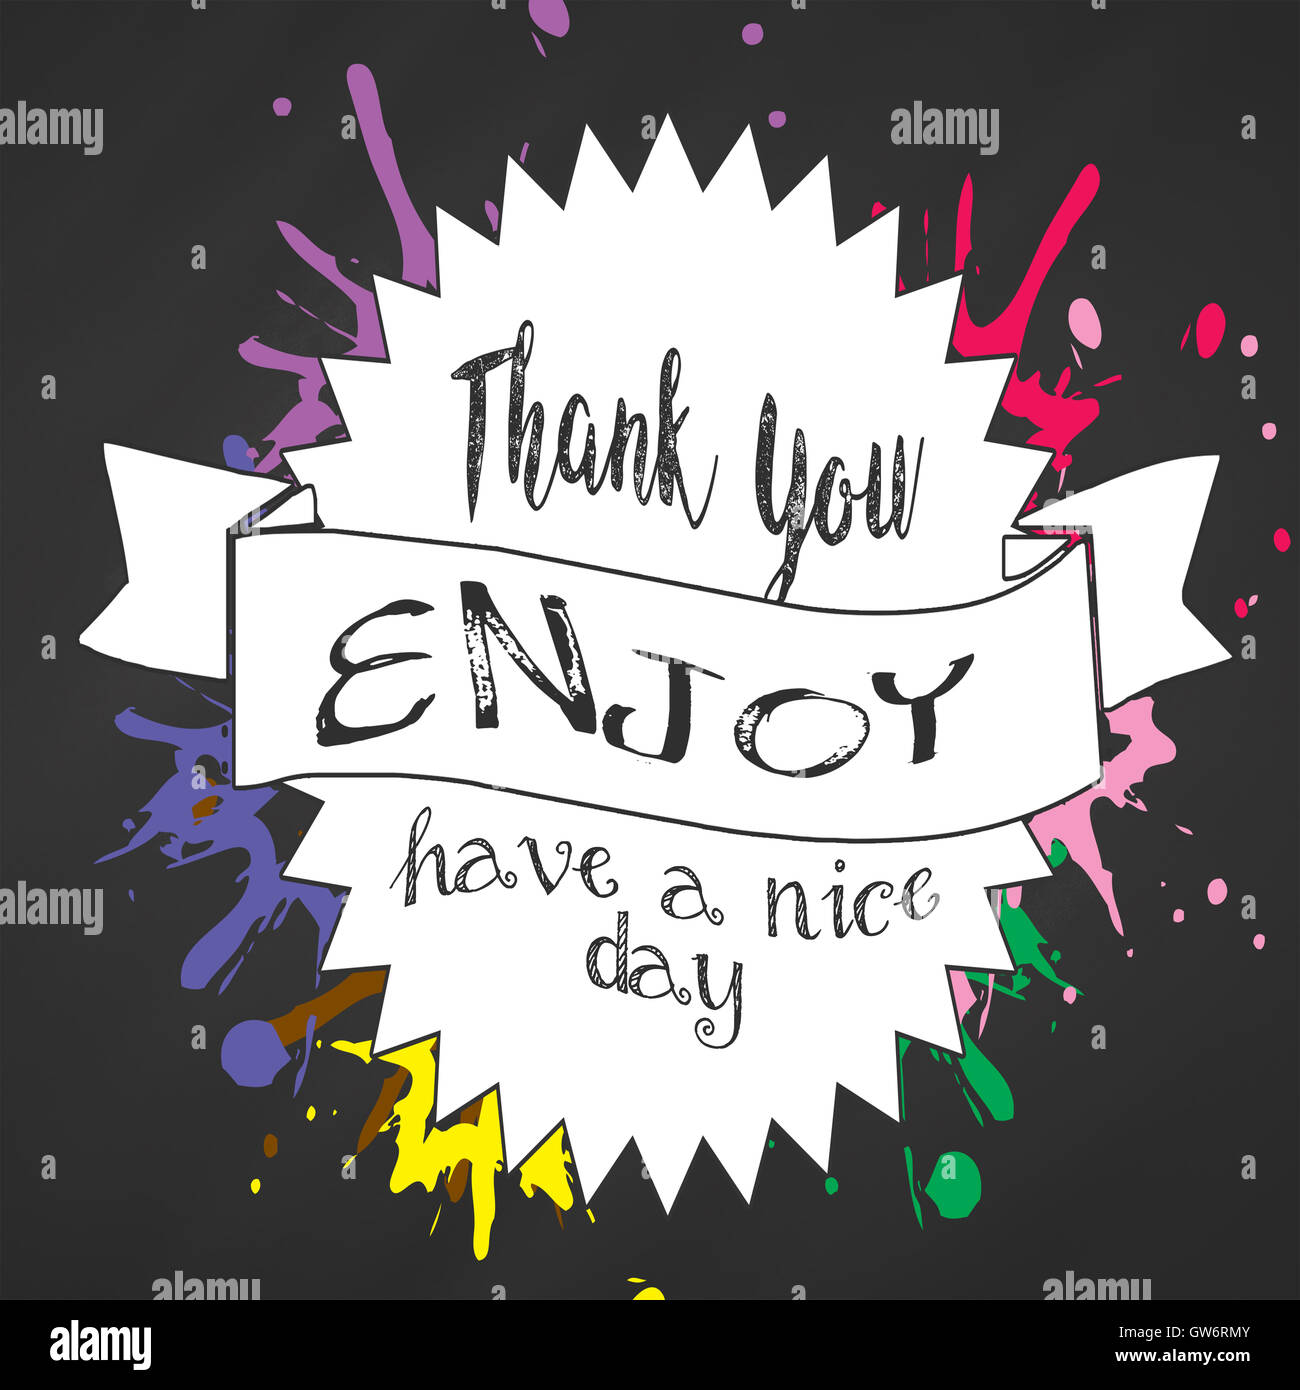 Thank you have a nice day Stock Photo - Alamy